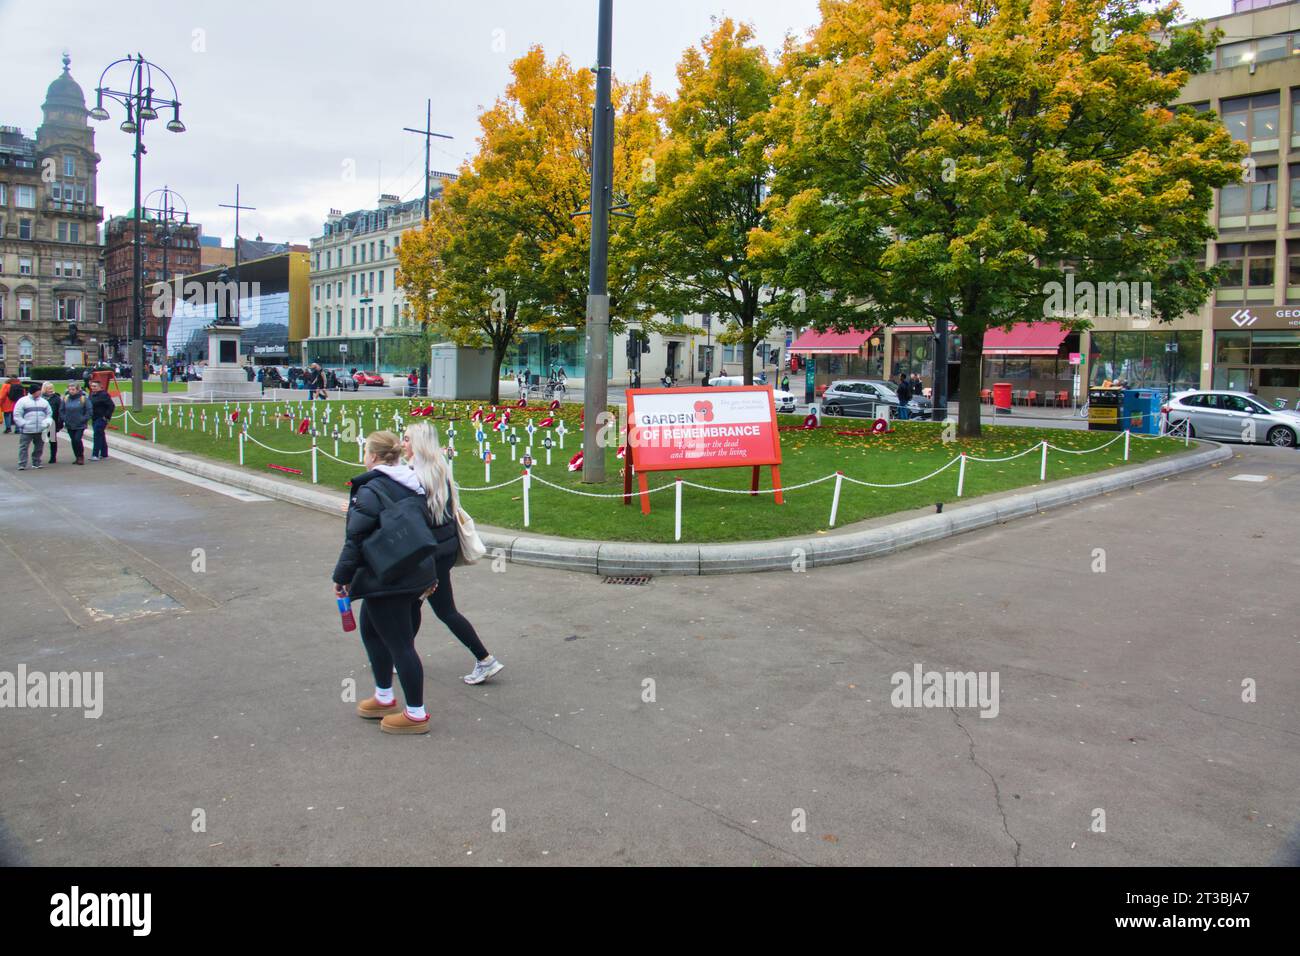 Glasgow, Scotland, UK. 24th October, 2023. Garden of remembrance in george square ahead of remembrance Sunday. Credit Gerard Ferry/Alamy Live News Stock Photo